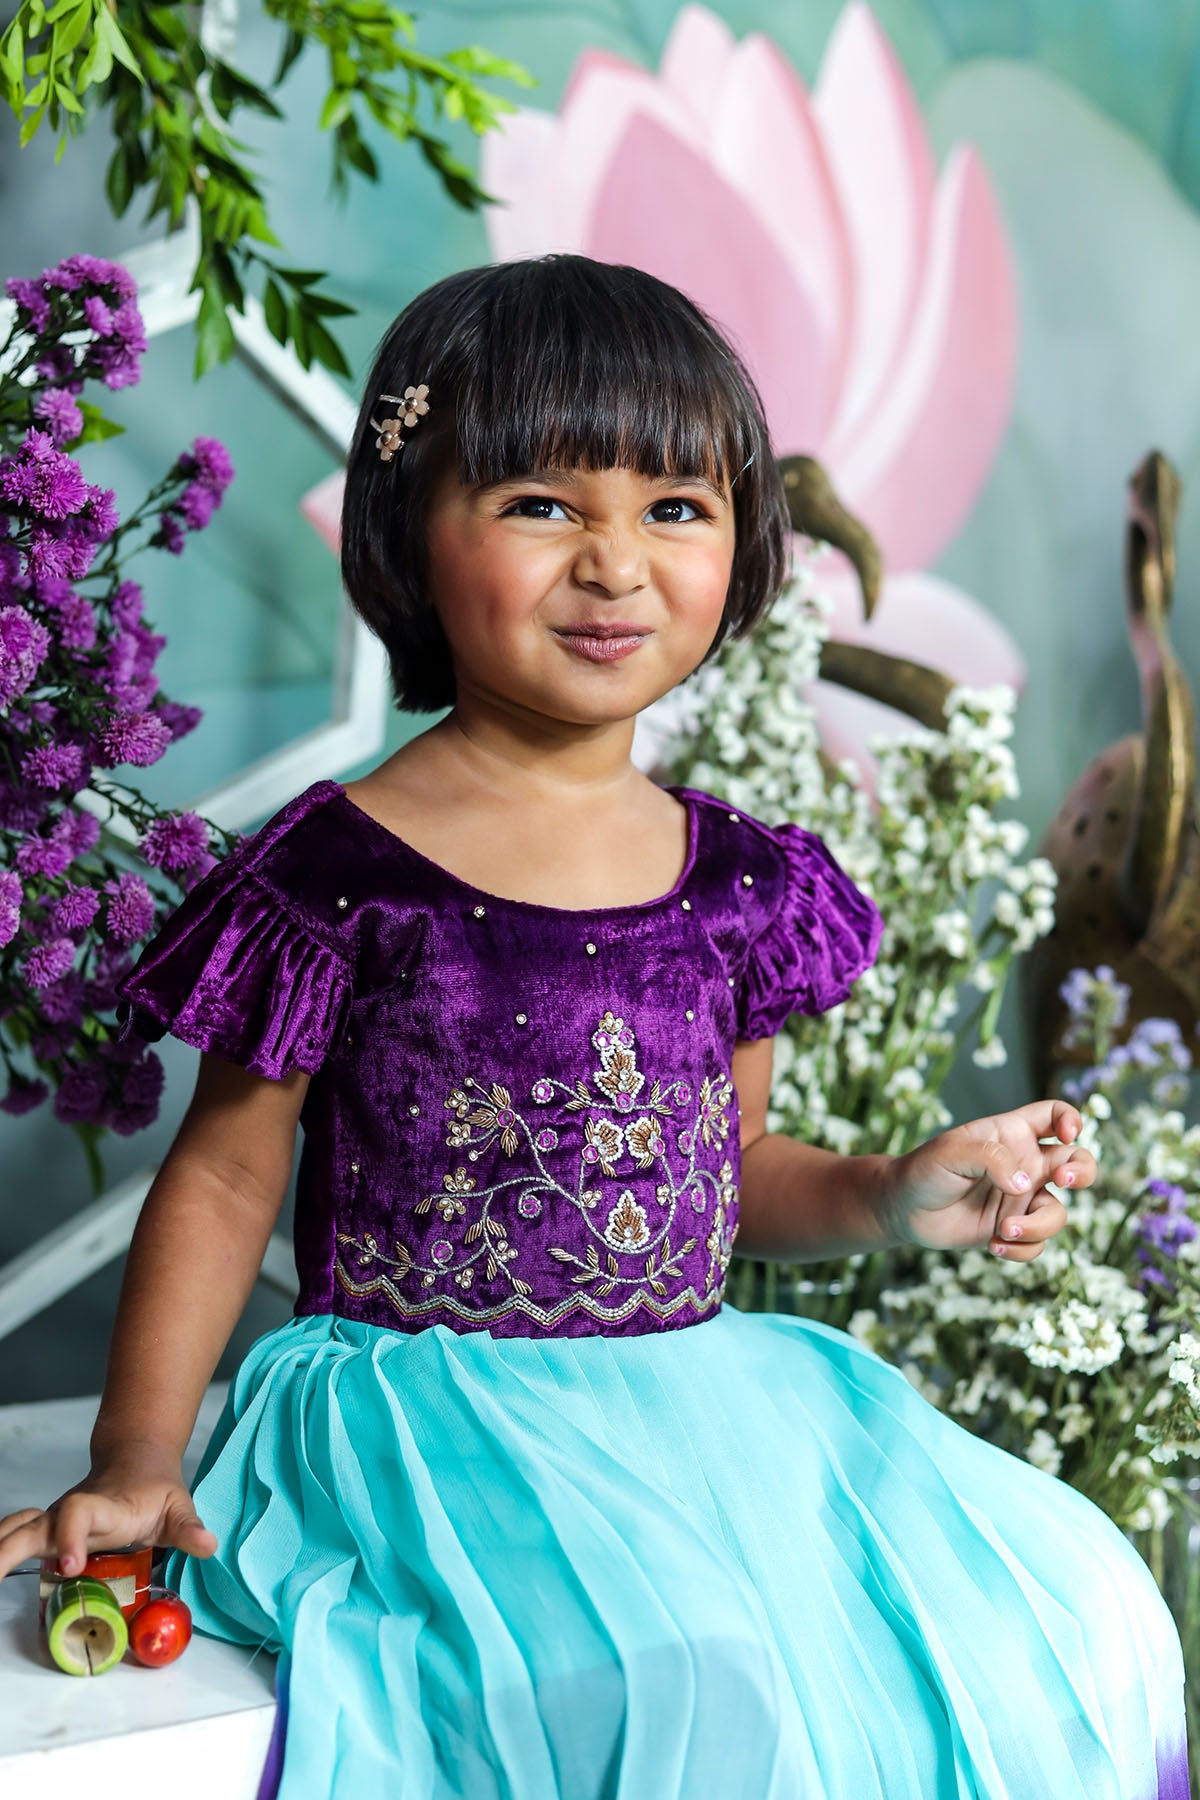 a little girl in a purple and blue dress